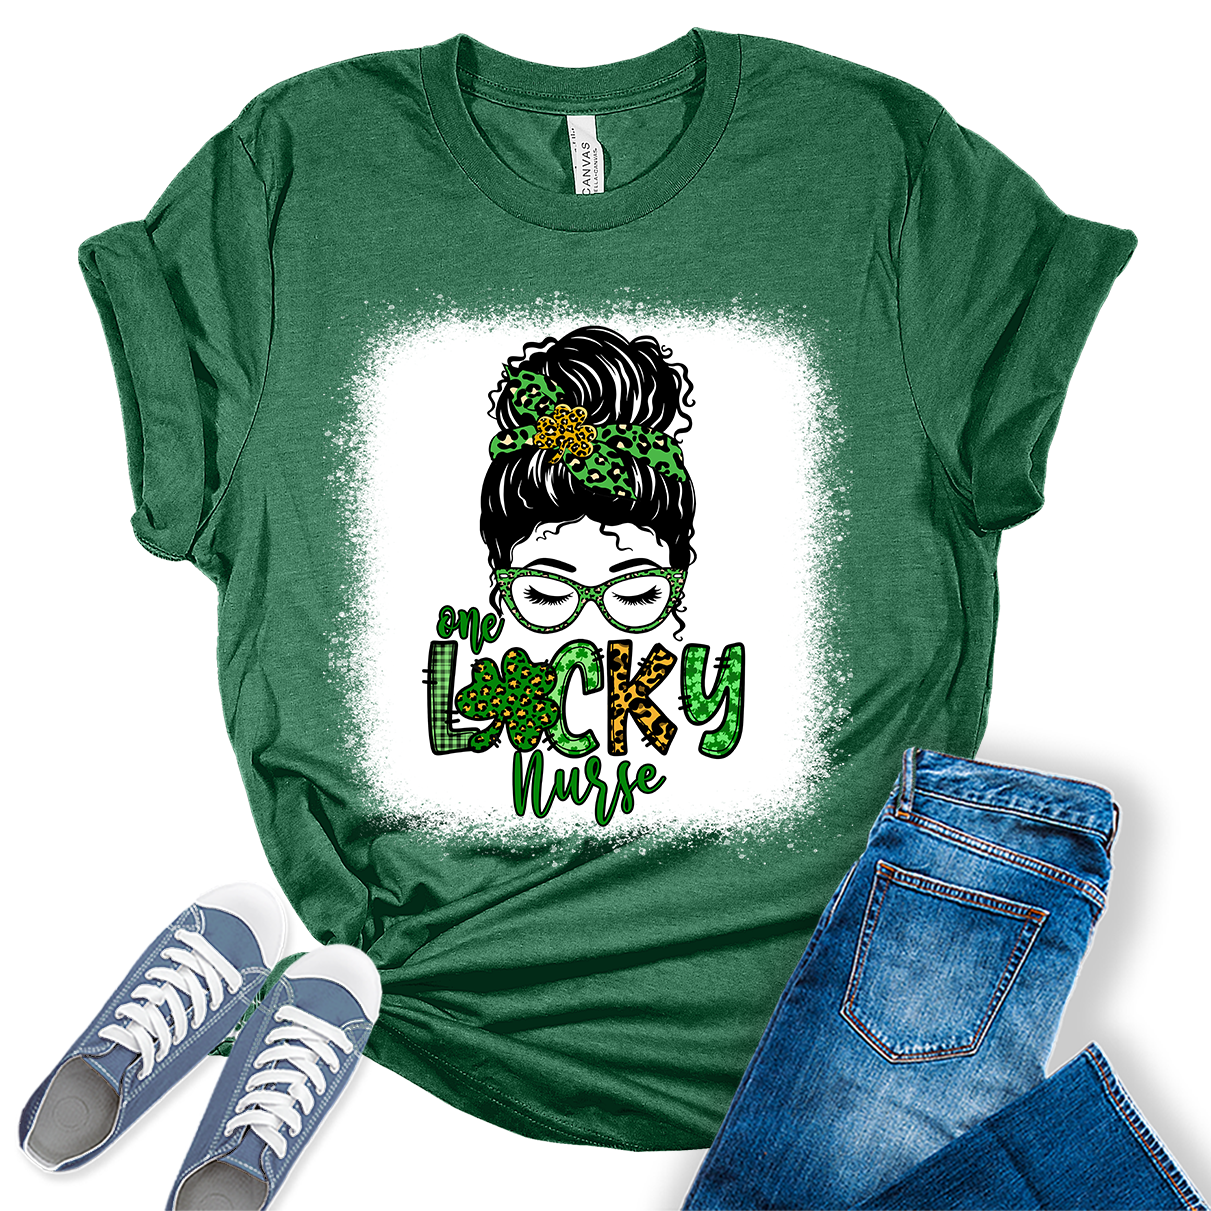 One Lucky Nurse Shirt For Women St. Patrick's Day